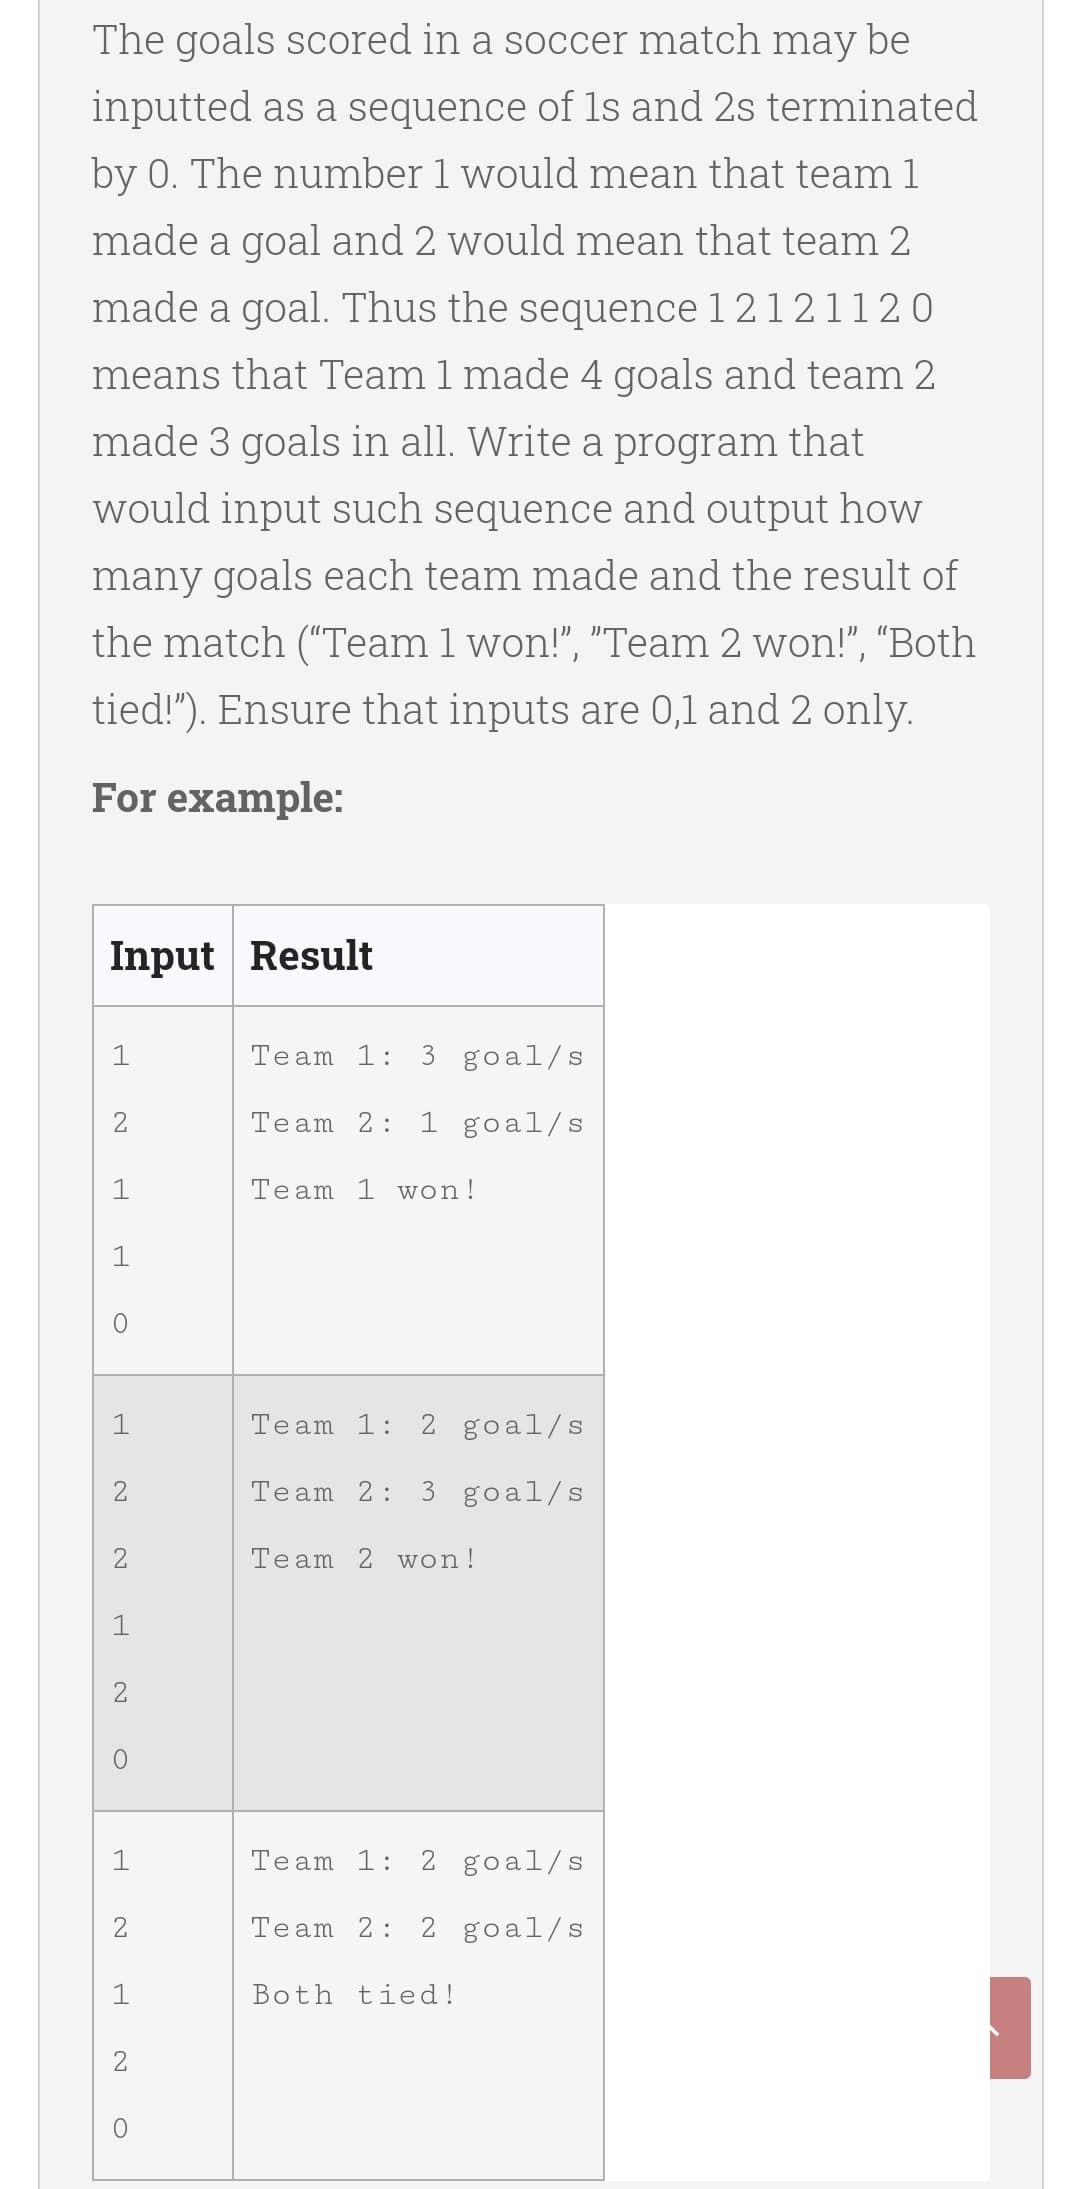 The goals scored in a soccer match may be
inputted as a sequence of 1s and 2s terminated
by 0. The number 1 would mean that team 1
made a goal and 2 would mean that team 2
made a goal. Thus the sequence 1 2 12 11 20
means that Team 1 made 4 goals and team 2
made 3 goals in all. Write a program that
would input such sequence and output how
many goals each team made and the result of
the match ("Team 1 won!", "Team 2 won!", "Both
tied!"). Ensure that inputs are 0,1 and 2 only.
For example:
Input Result
1
Team 1:
3 goal/s
2
Team 2:
1 goal/s
1
Team 1 won!
1
Team 1:
2 goal/s
2
Team 2:
3 goal/s
2
Team 2 won
1
1
Team 1:
2 goal/s
Team 2:
2 goal/s
Both tied!
2
